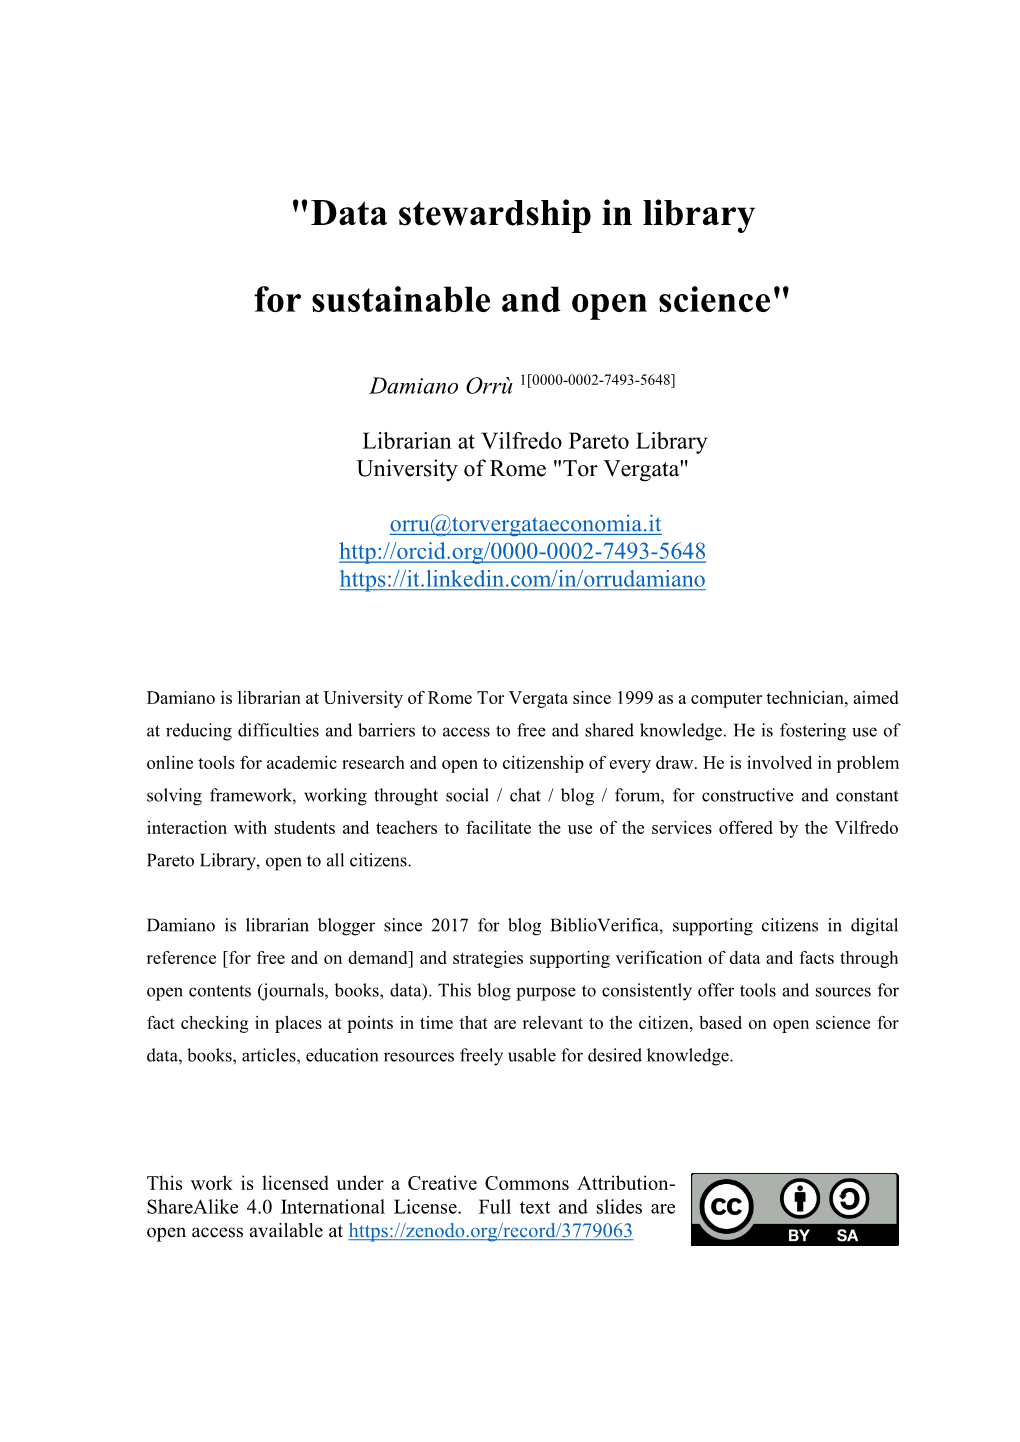 "Data Stewardship in Library for Sustainable and Open Science"